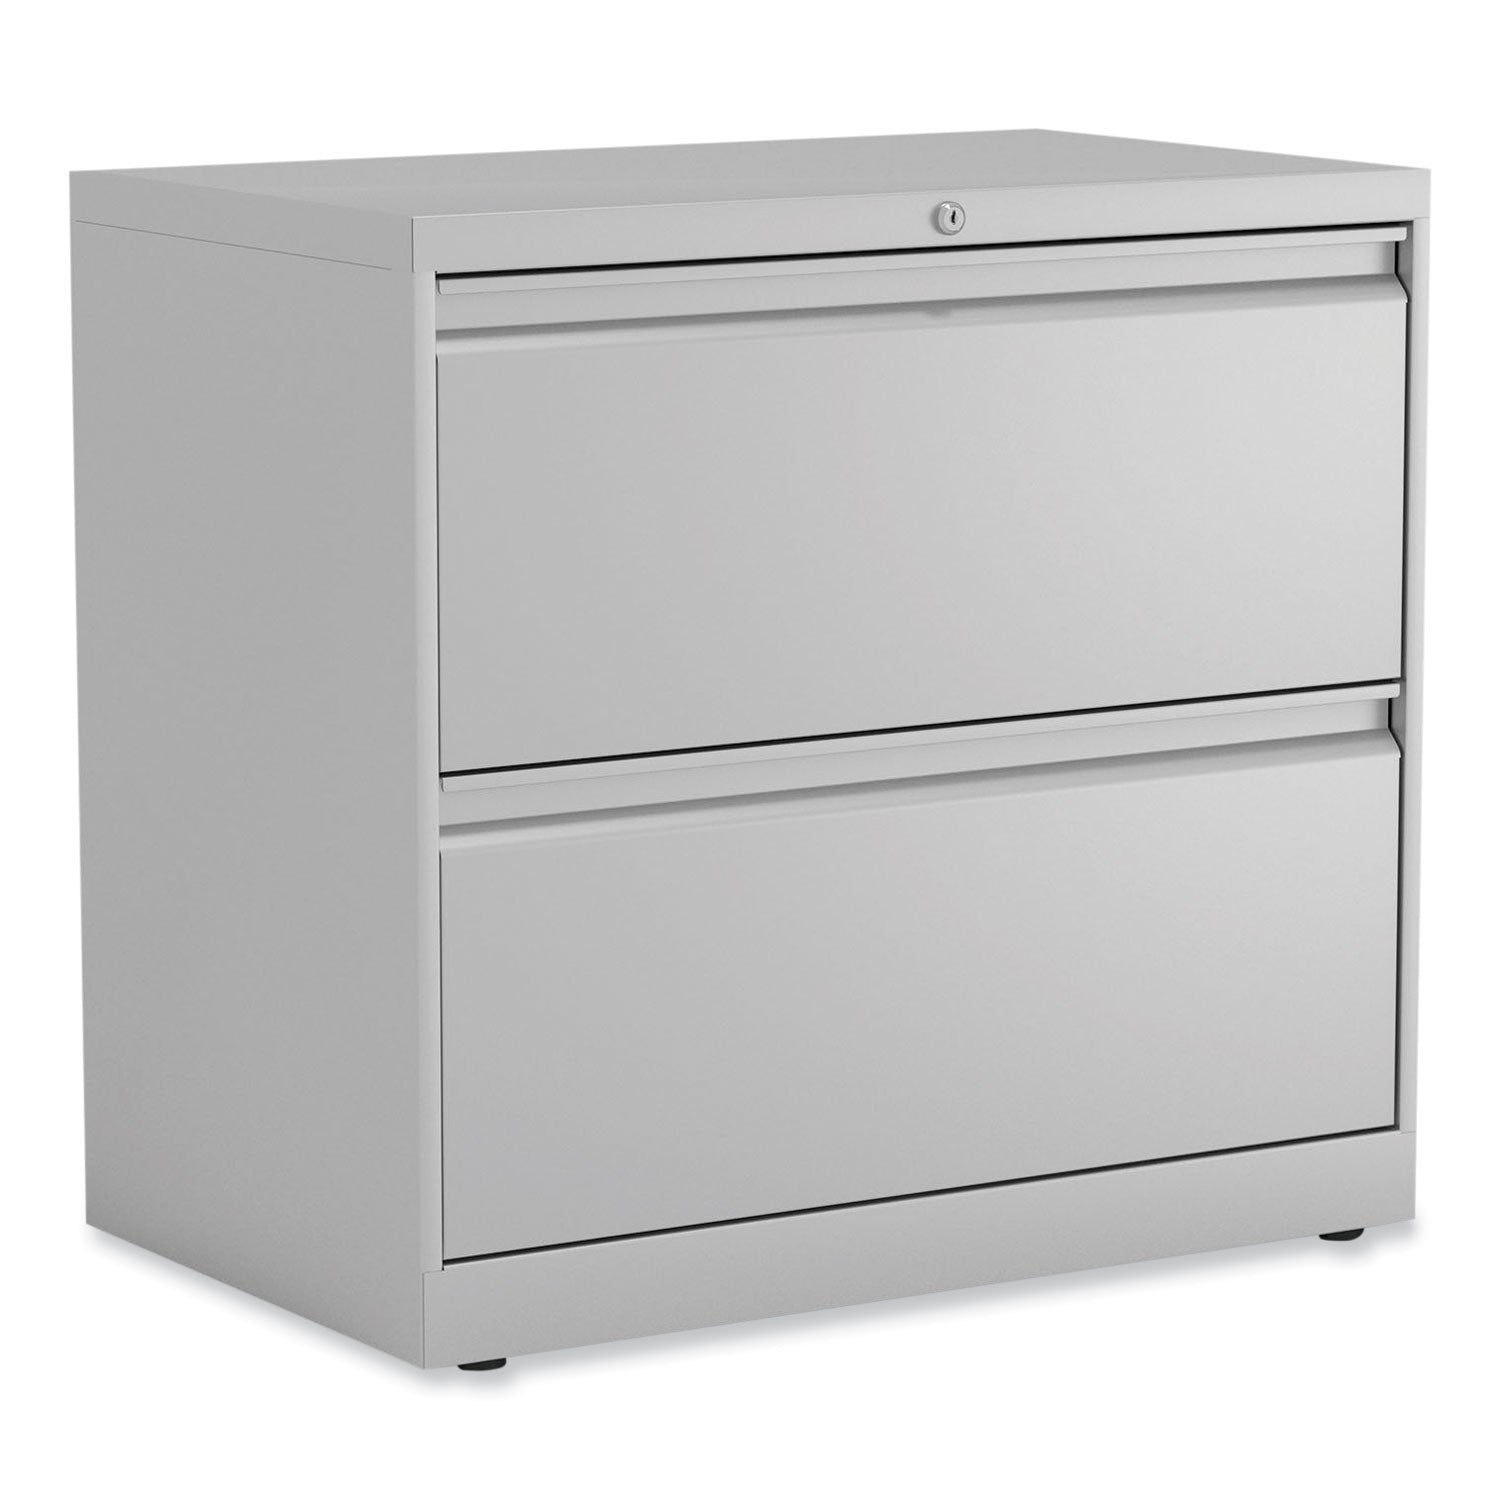 lateral-file-2-legal-letter-size-file-drawers-light-gray-36-x-1863-x-28_alehlf3029lg - 6